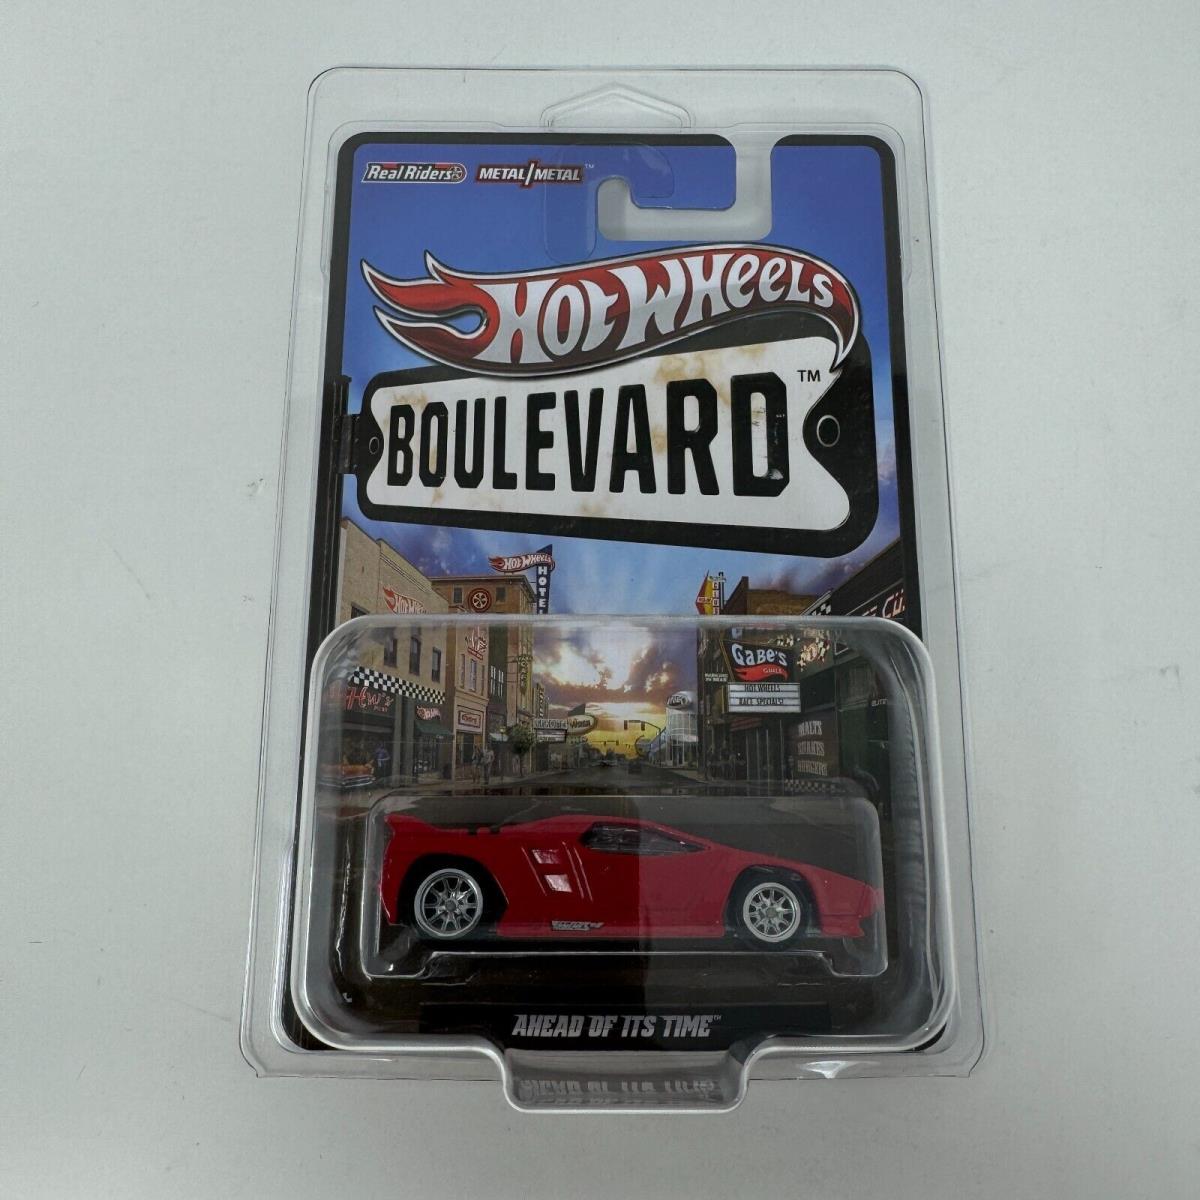 Hot Wheels 2012 Boulevard Vector W8 Twinturbo Ahead Of Its Time w/ Protector